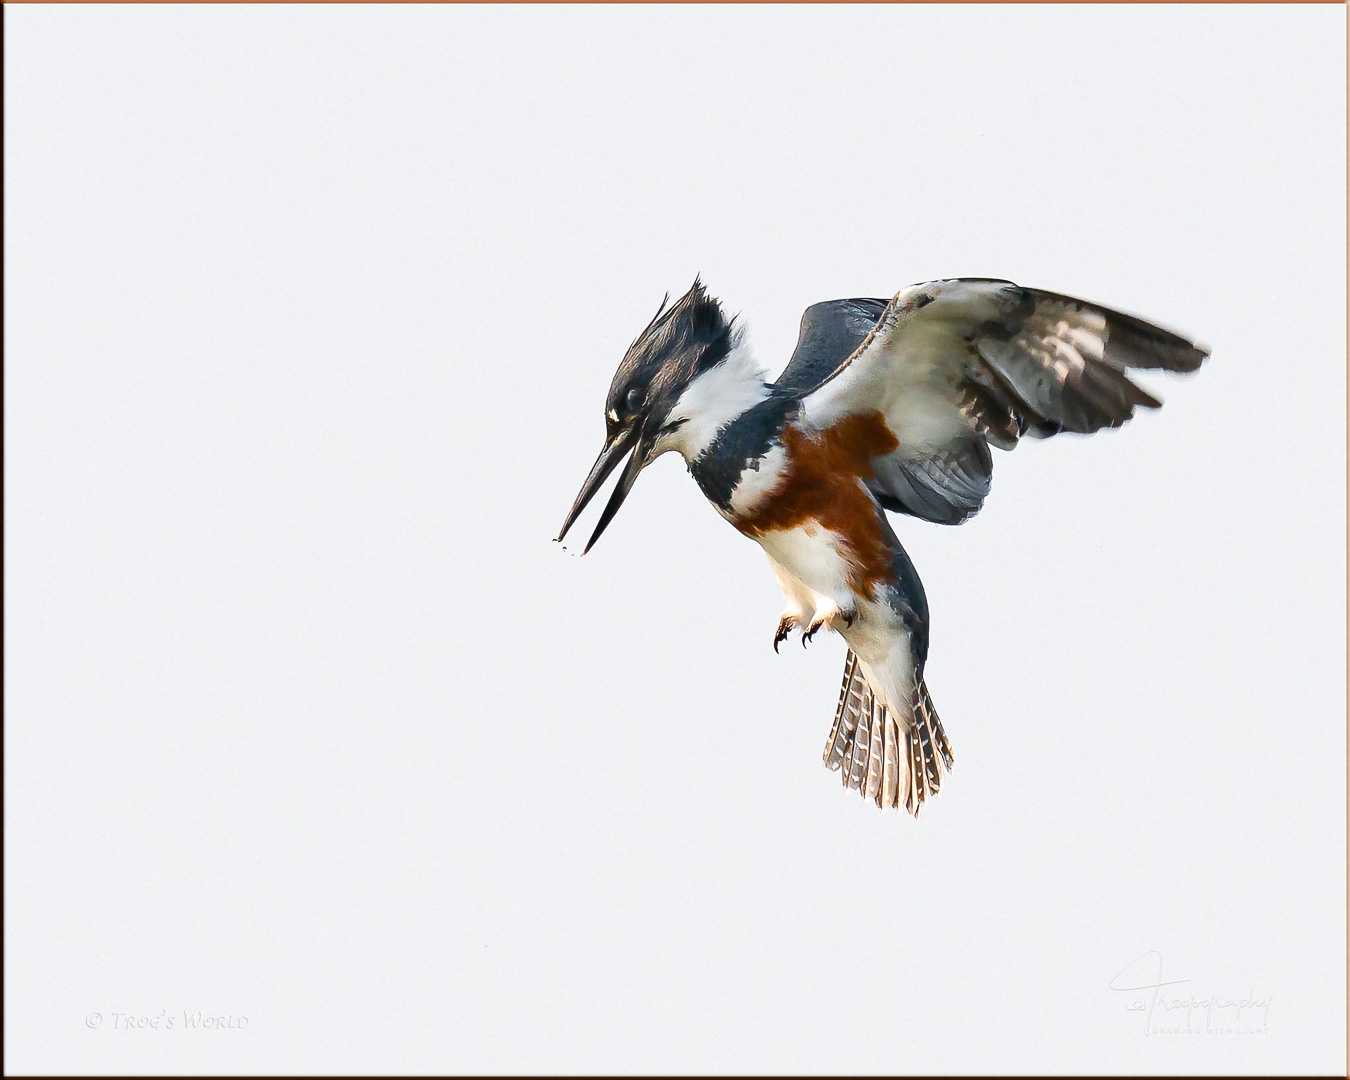 Belted Kingfisher hovering over a river